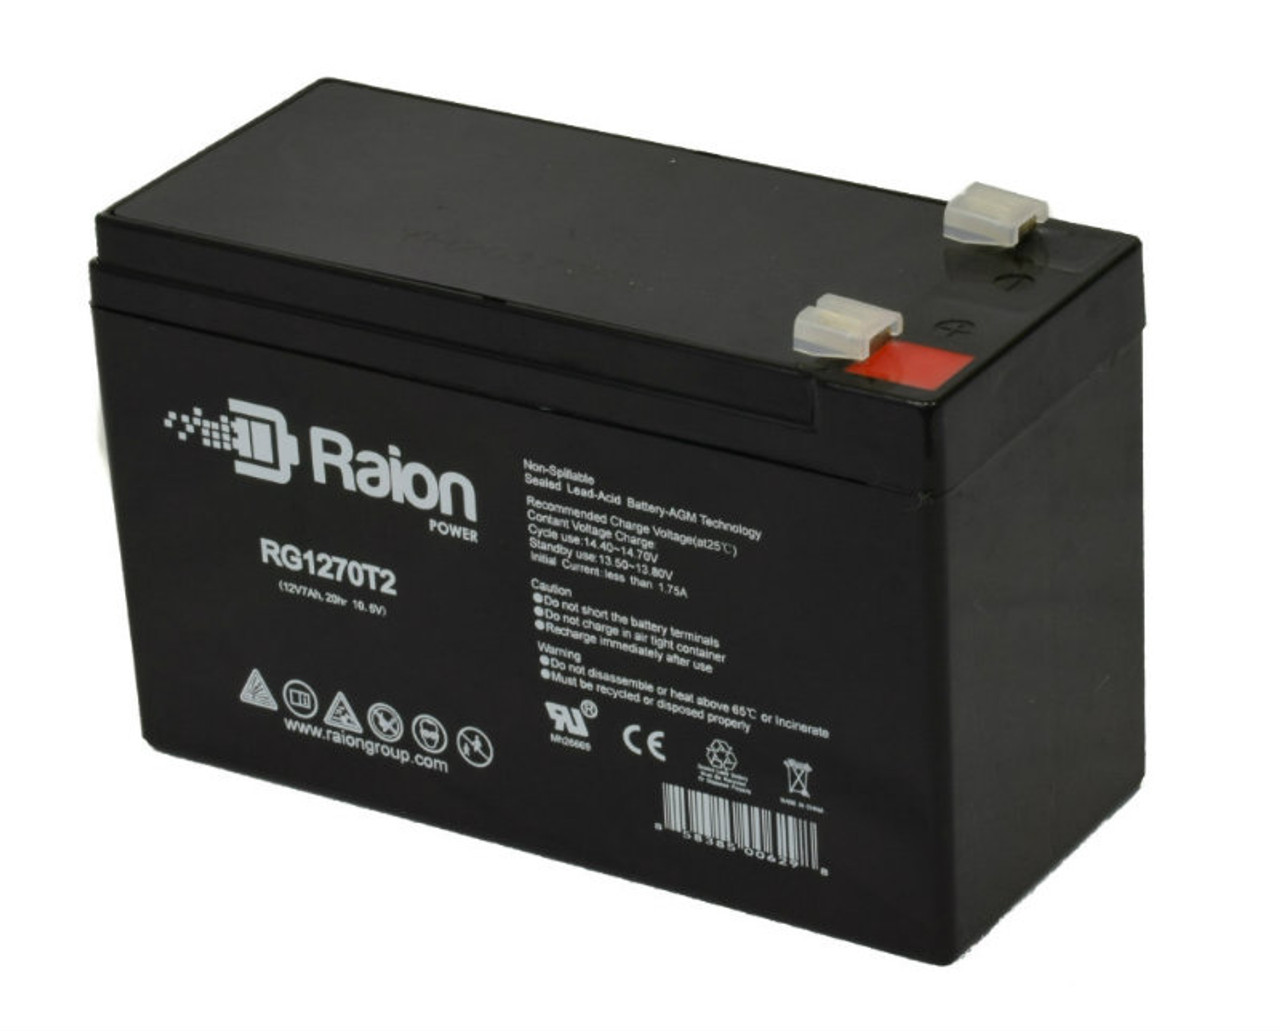 Raion Power Replacement 12V 7Ah Battery for Cybex 770A Arc Trainer Fitness Equipment